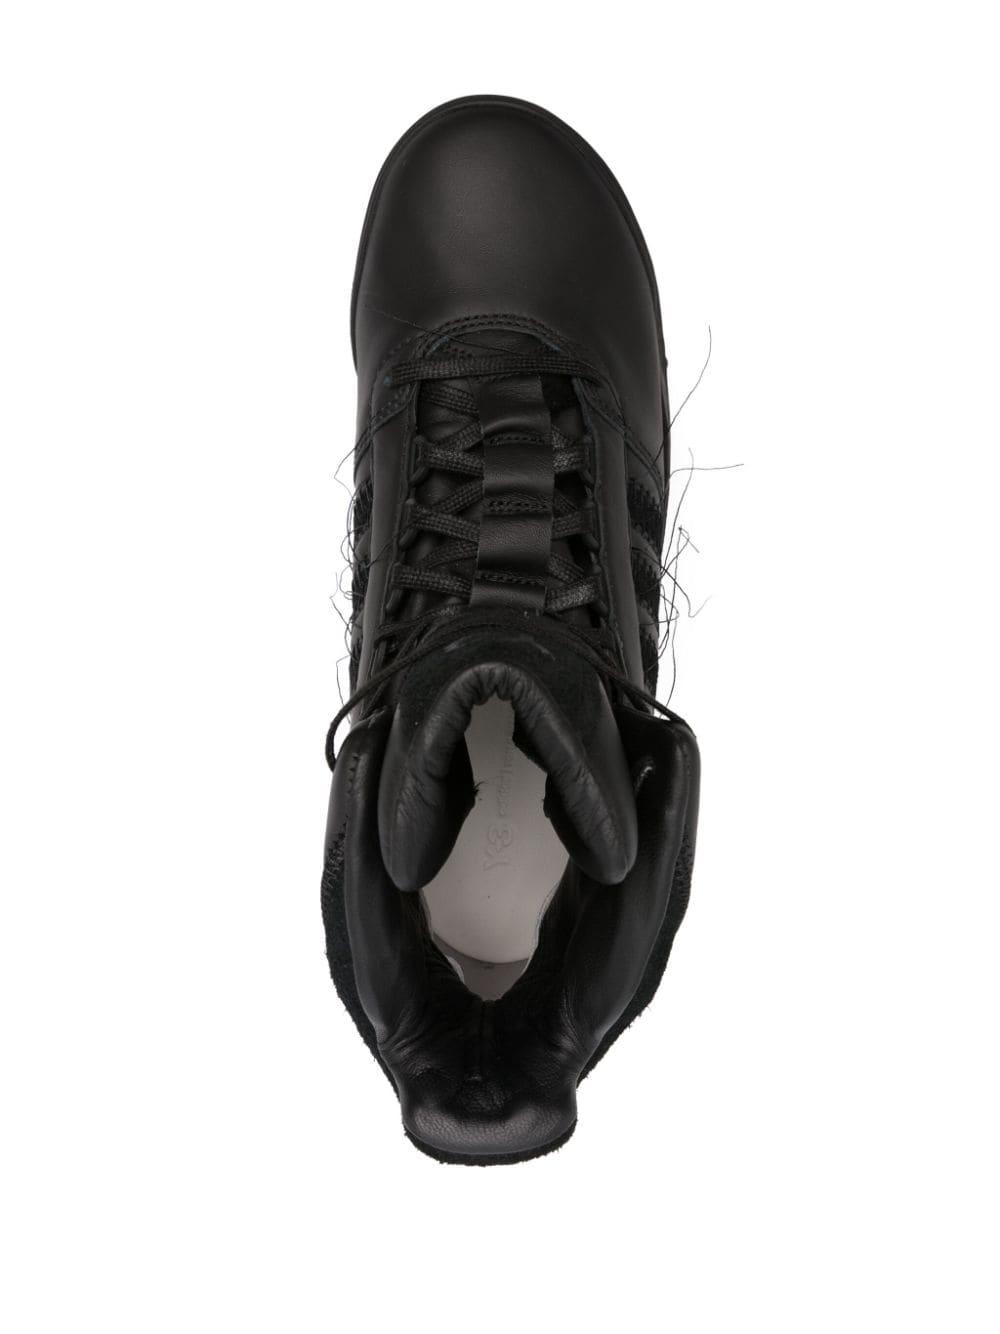 Y-3 Gsg9 Leather Sneakers in Black for Men | Lyst